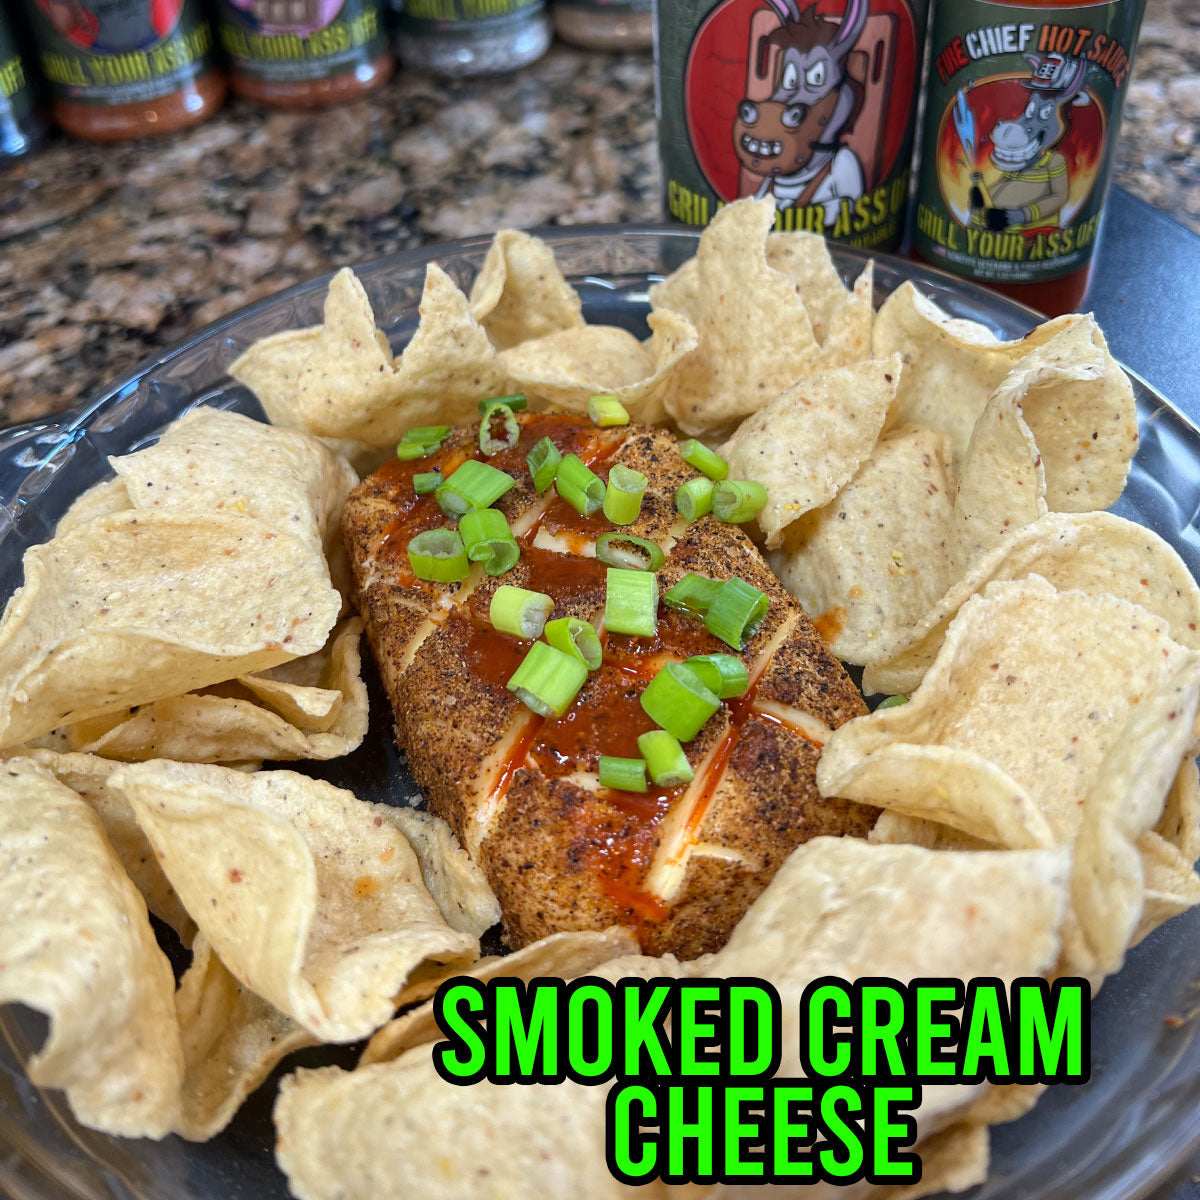 Smoked cream cheese seasoned with Cannibal All Purpose Spice and Fire Chief Hot Sauce, Tortilla Chips